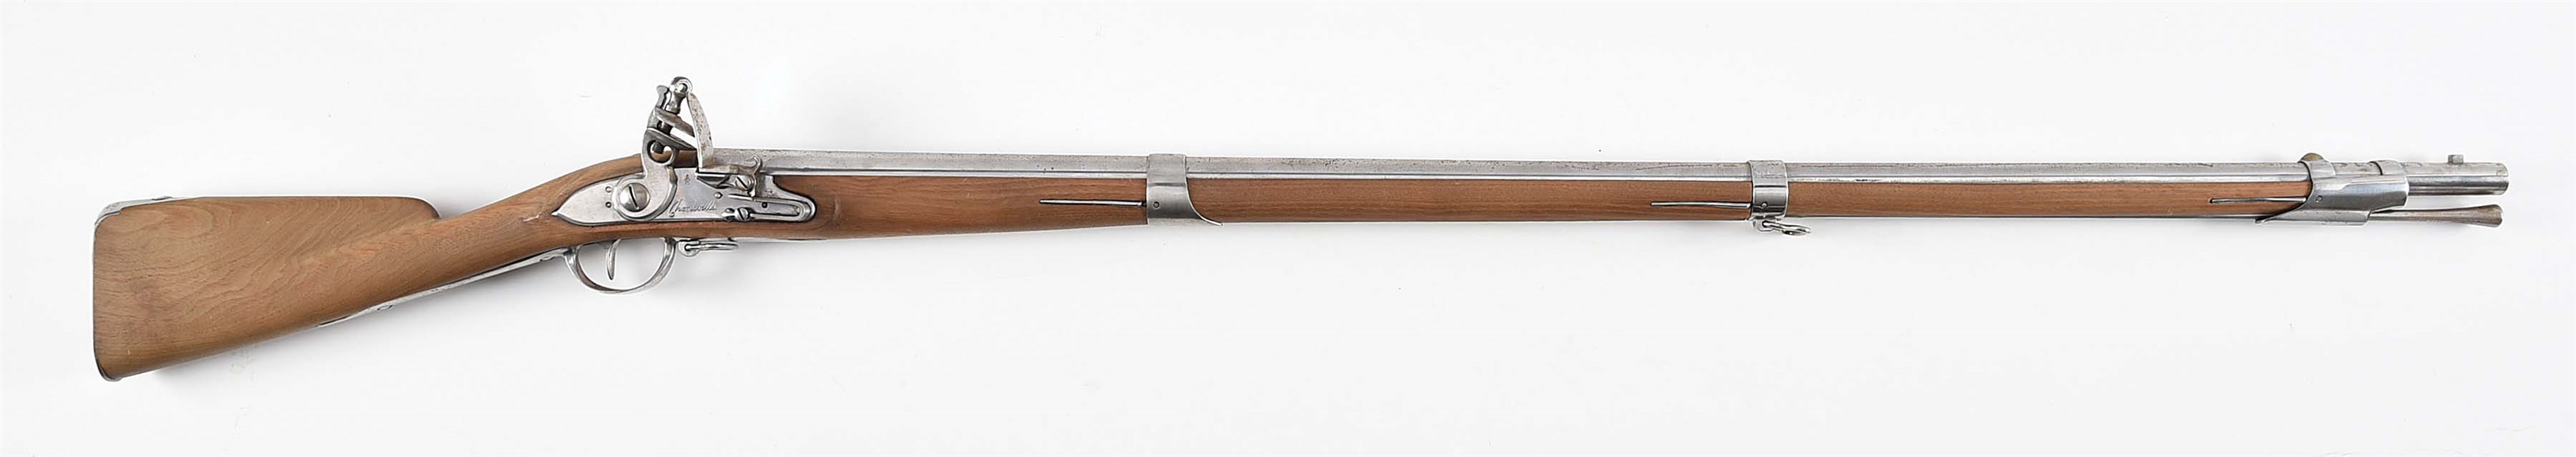 (A) NAVY ARMS REPRODUCTION CHARLEVILLE FLINTLOCK MUSKET.